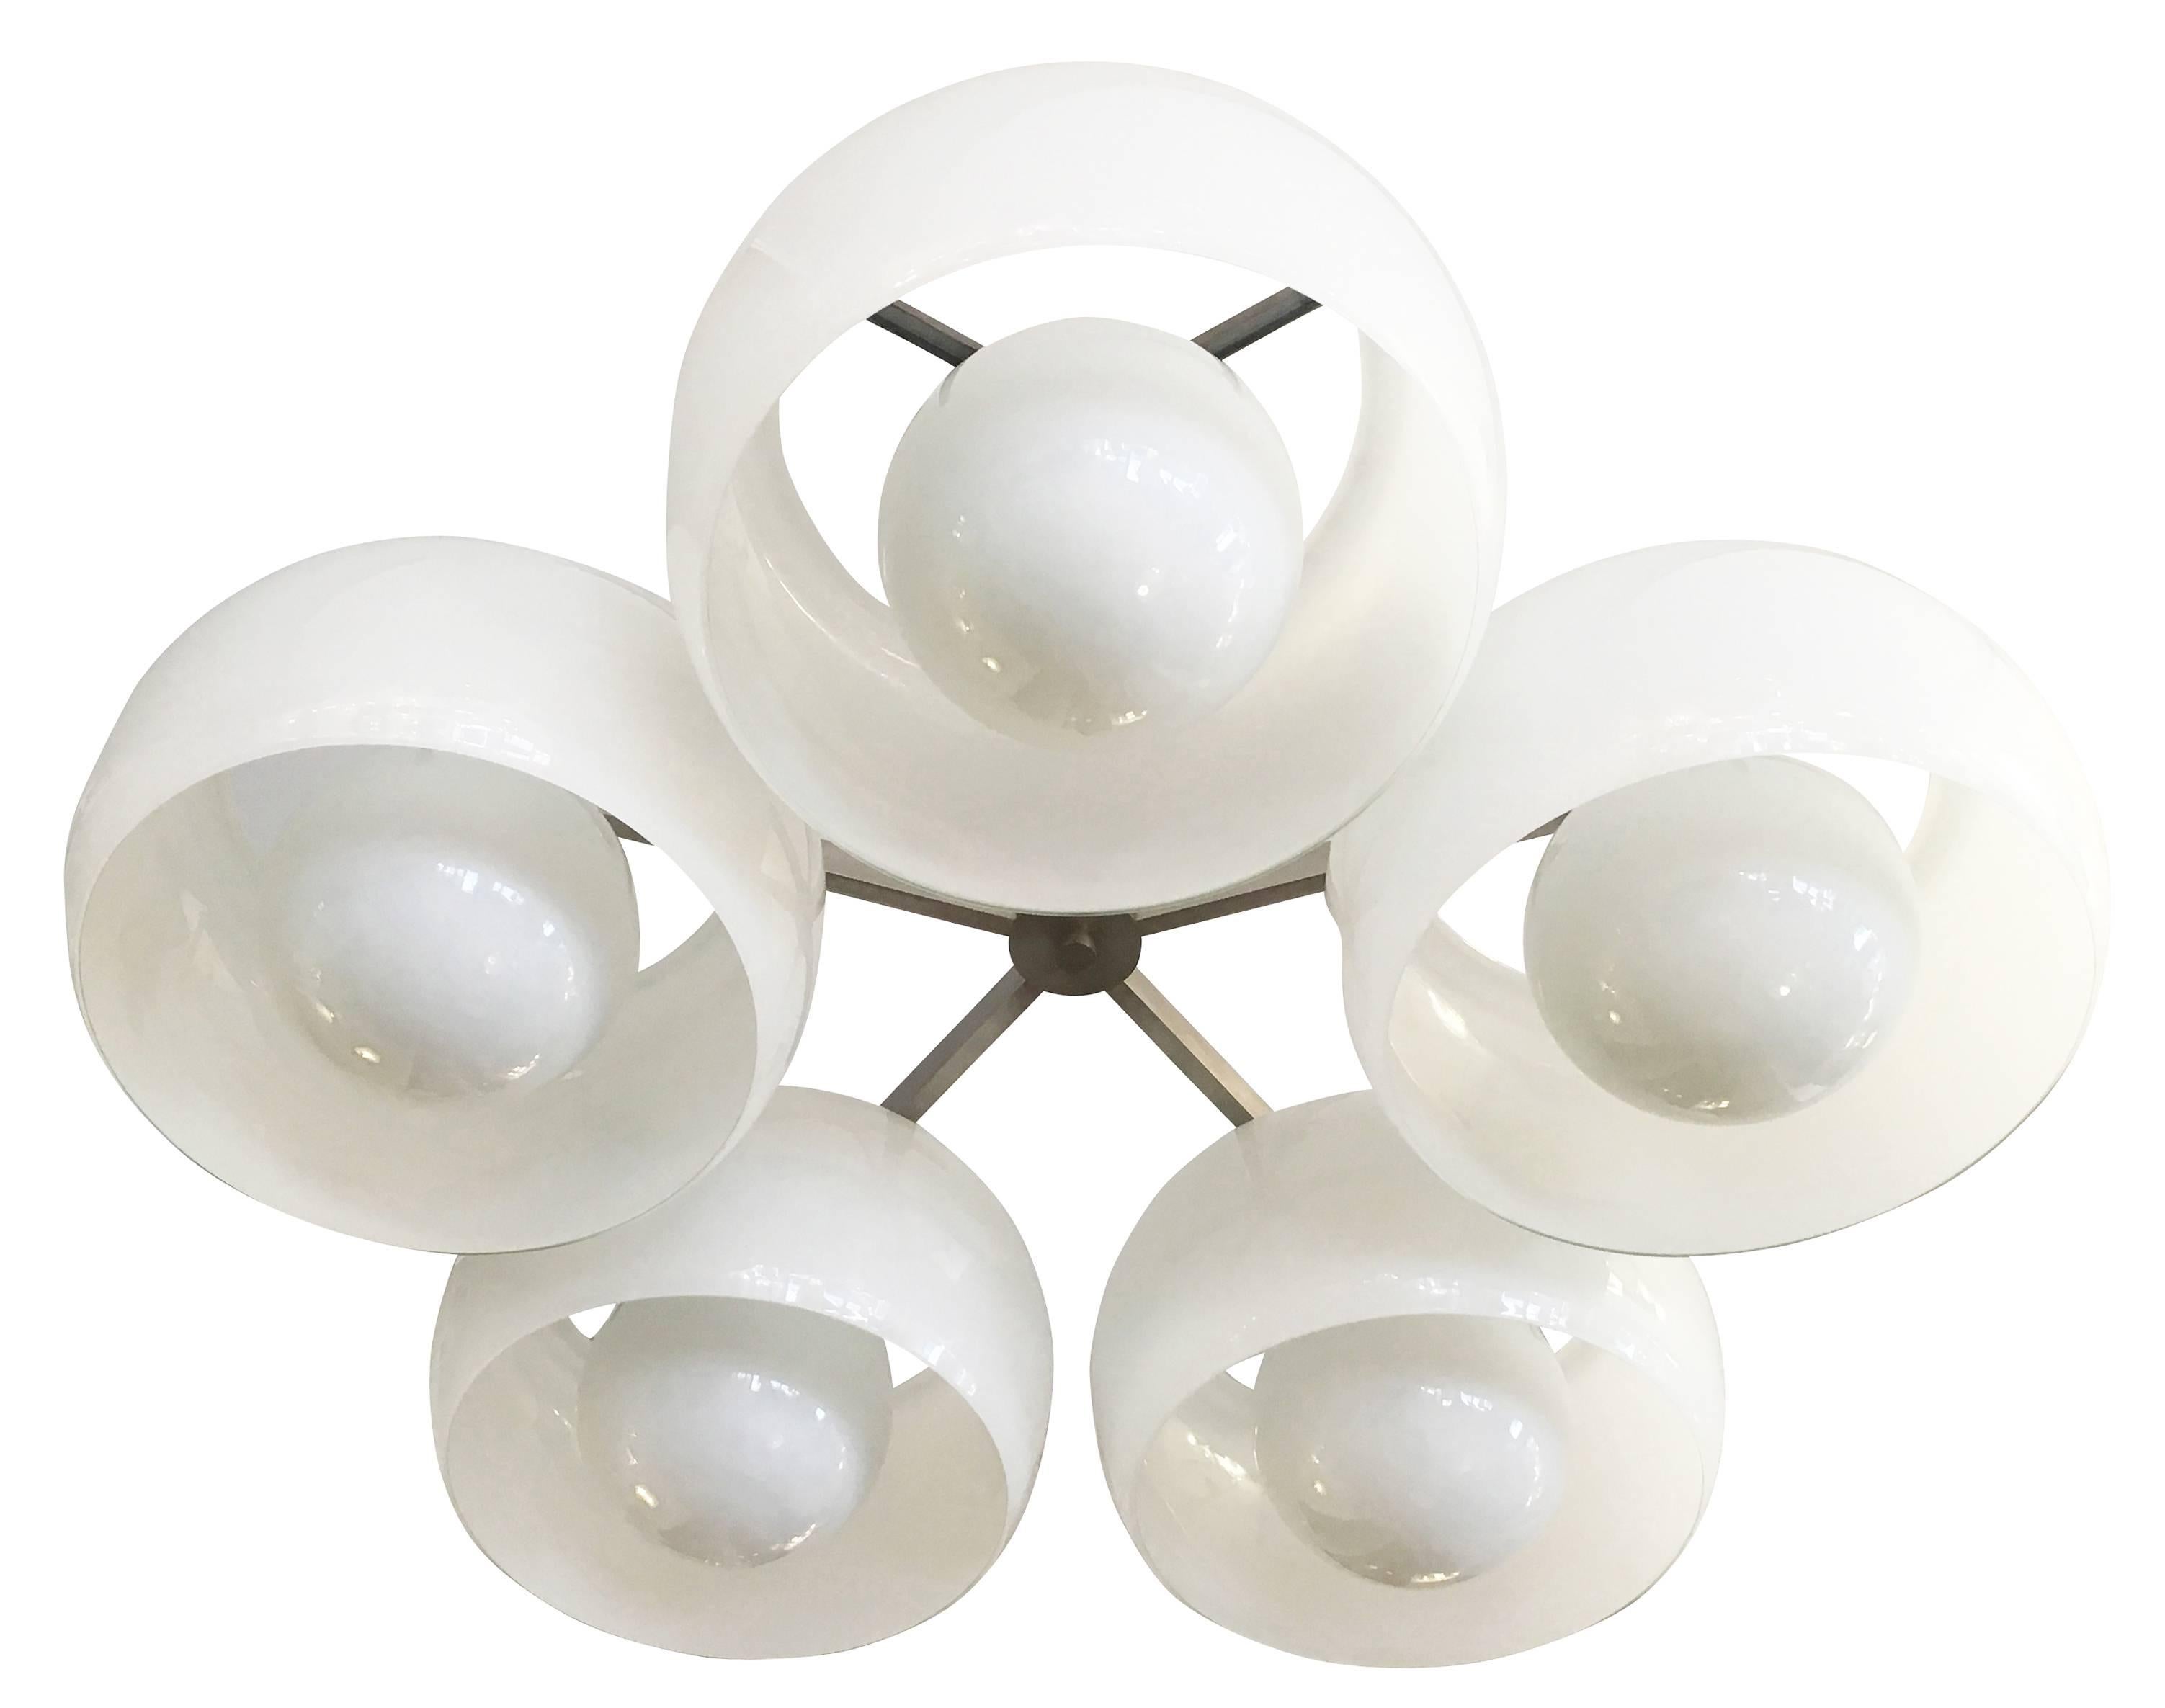 Mid-20th Century Triclinio Ceiling Light by Magistretti for Artemide